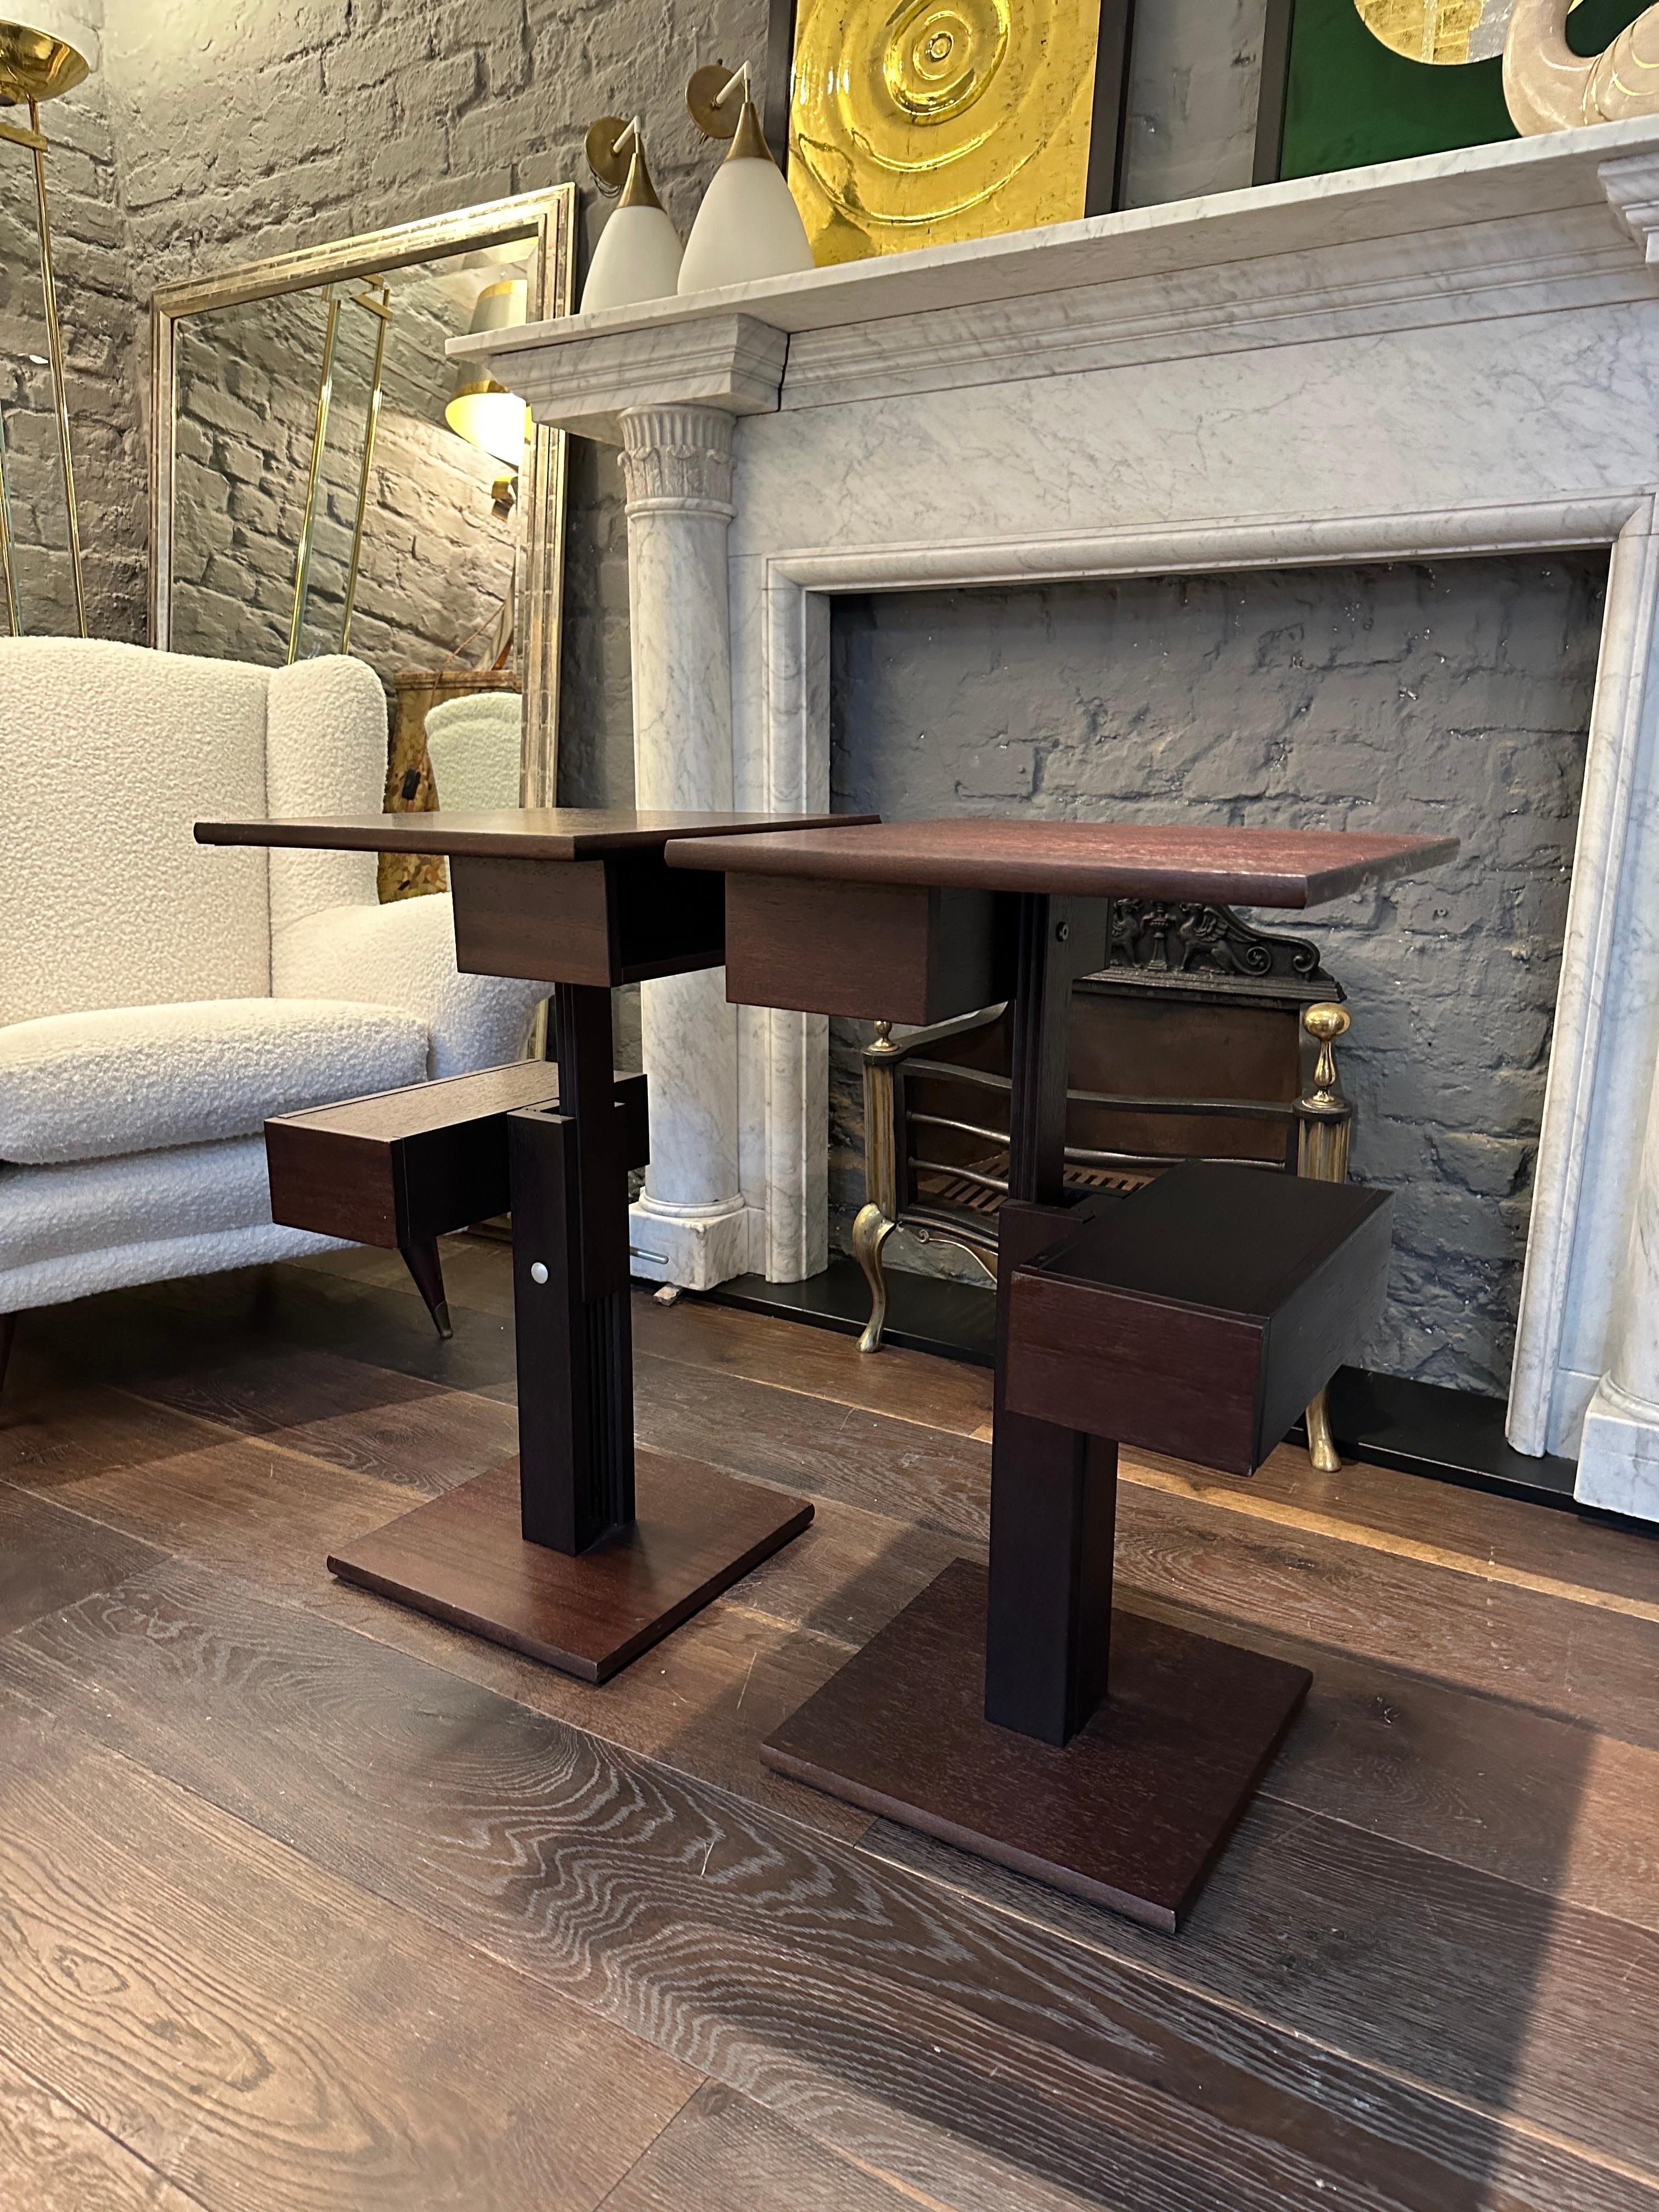 A pair of height adjustable side, end or bedside tables with two storage compartments on each. The height at full extension is first image is adjusted by leaver at the back. 

Parisian designer and Engineer Bernard Vuarnesson created furniture